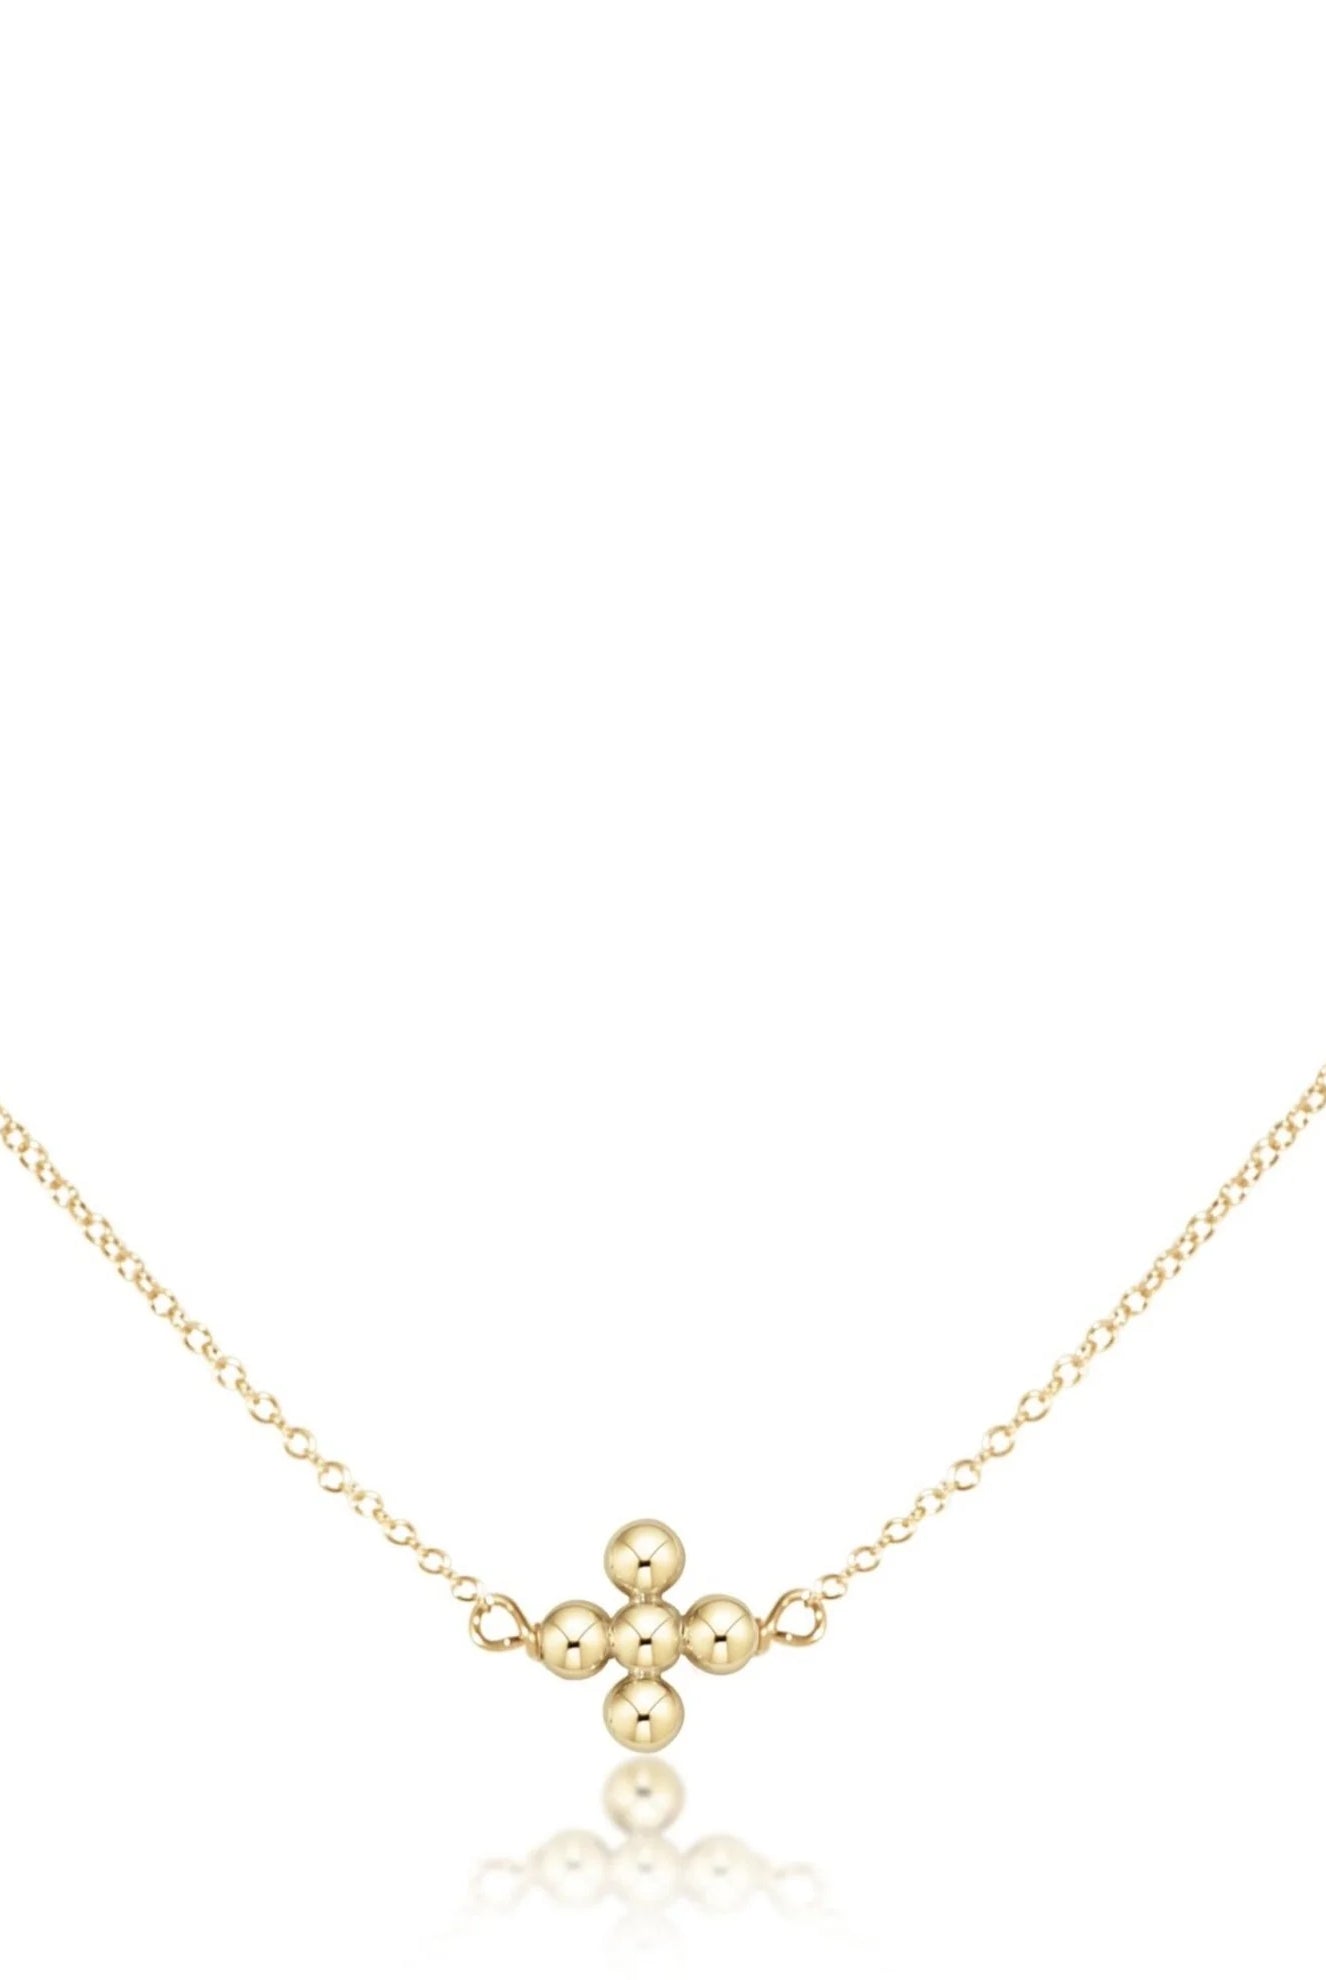 Gold Signature Cross Simplicity Necklace-Necklaces-eNewton-The Lovely Closet, Women's Fashion Boutique in Alexandria, KY